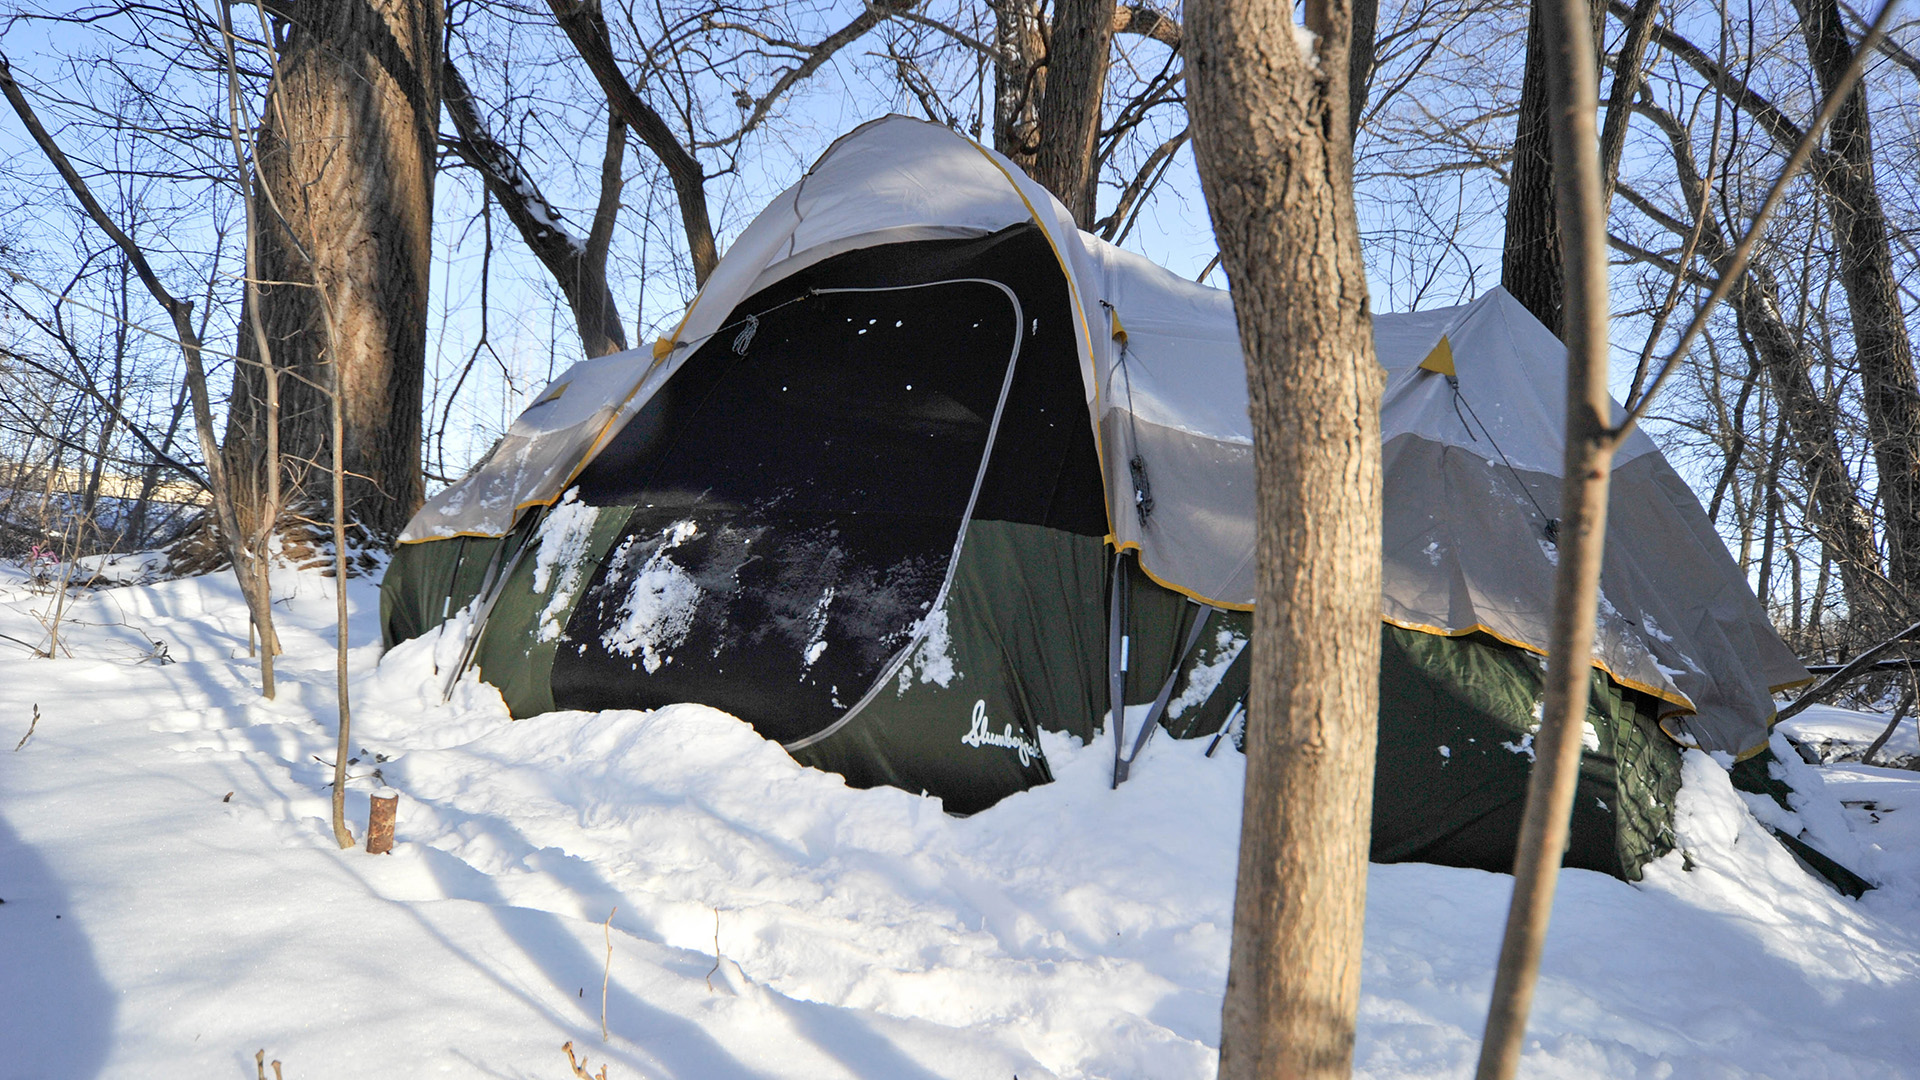 A tent sits on snow-covered ground among a stand of trees.